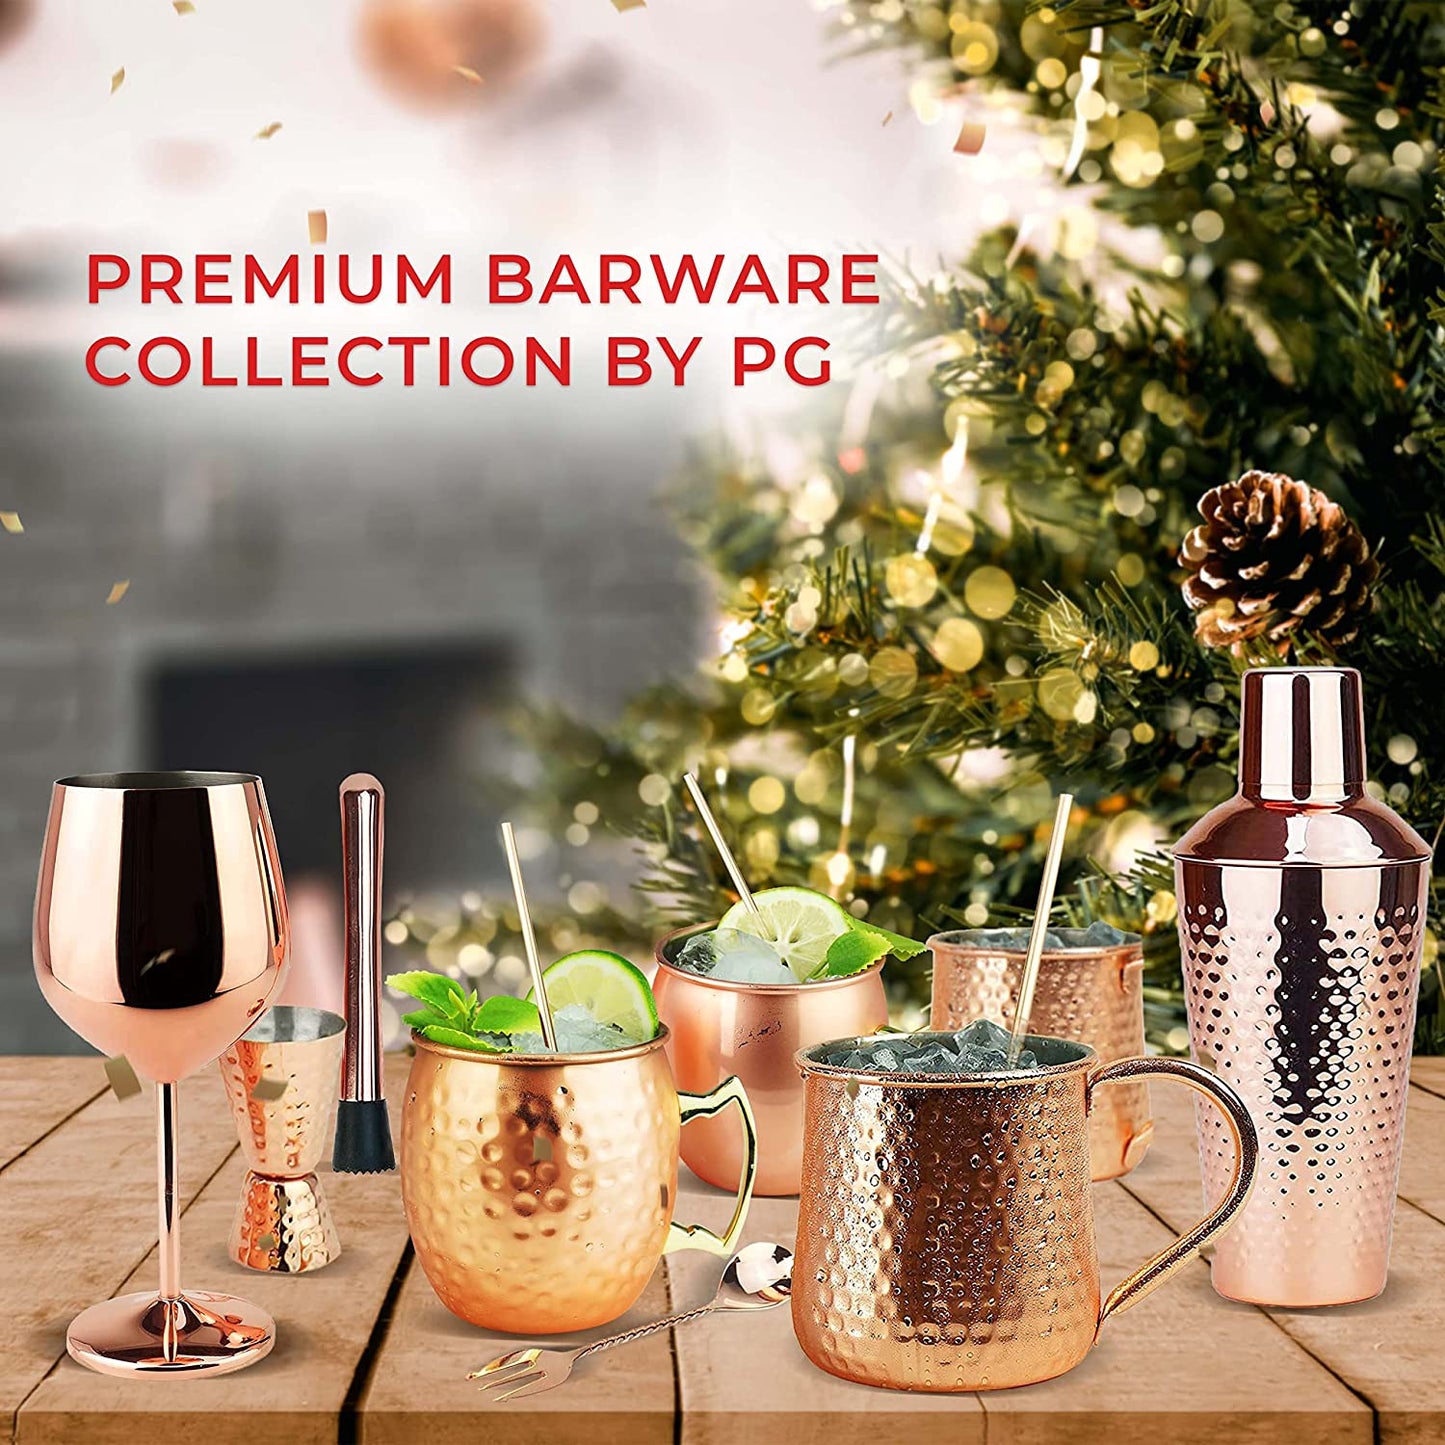 Moscow Mule Mugs | Large Size 19 Ounces | Set of 4 Hammered Cups | Stainless Steel Lining | Pure Copper Plating | Gold Brass Handles | 3.7 Inches Diameter X 4 Inches Tall